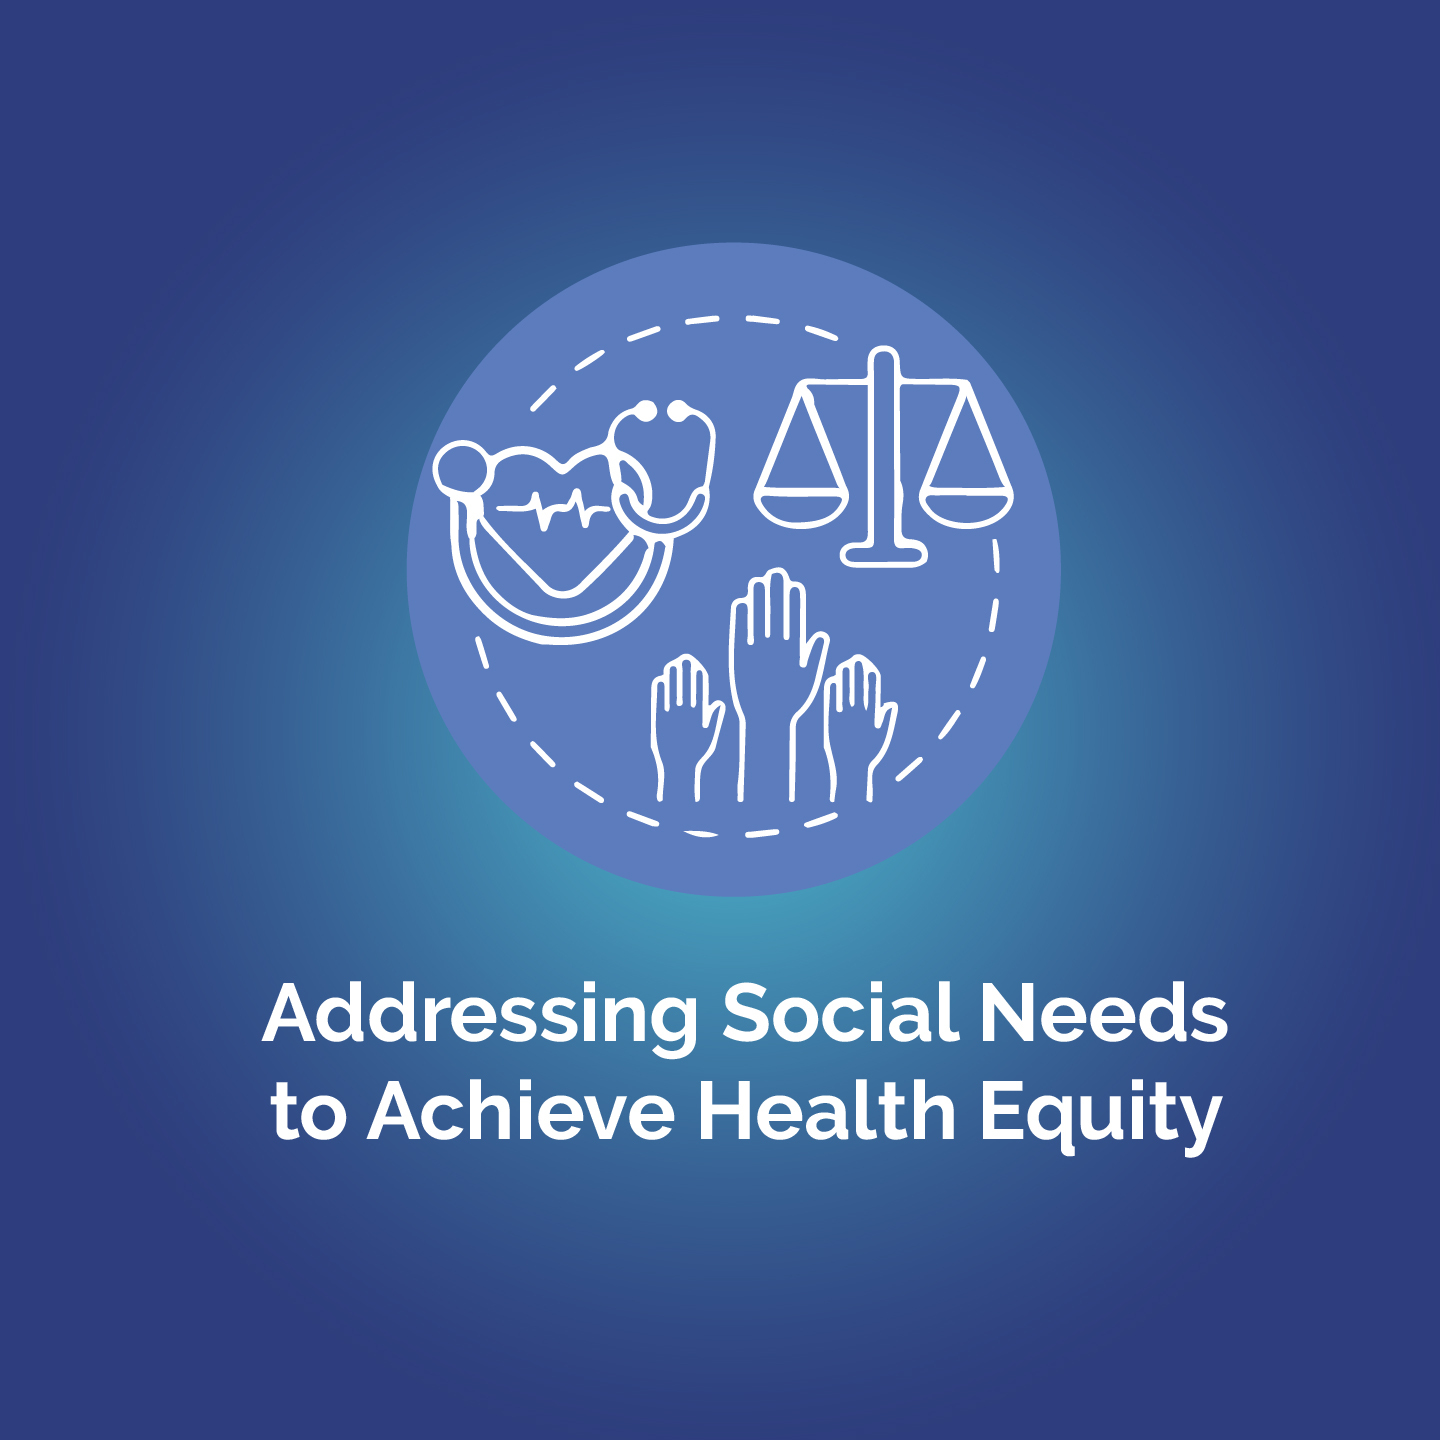 Addressing Social Needs to Achieve Health Equity